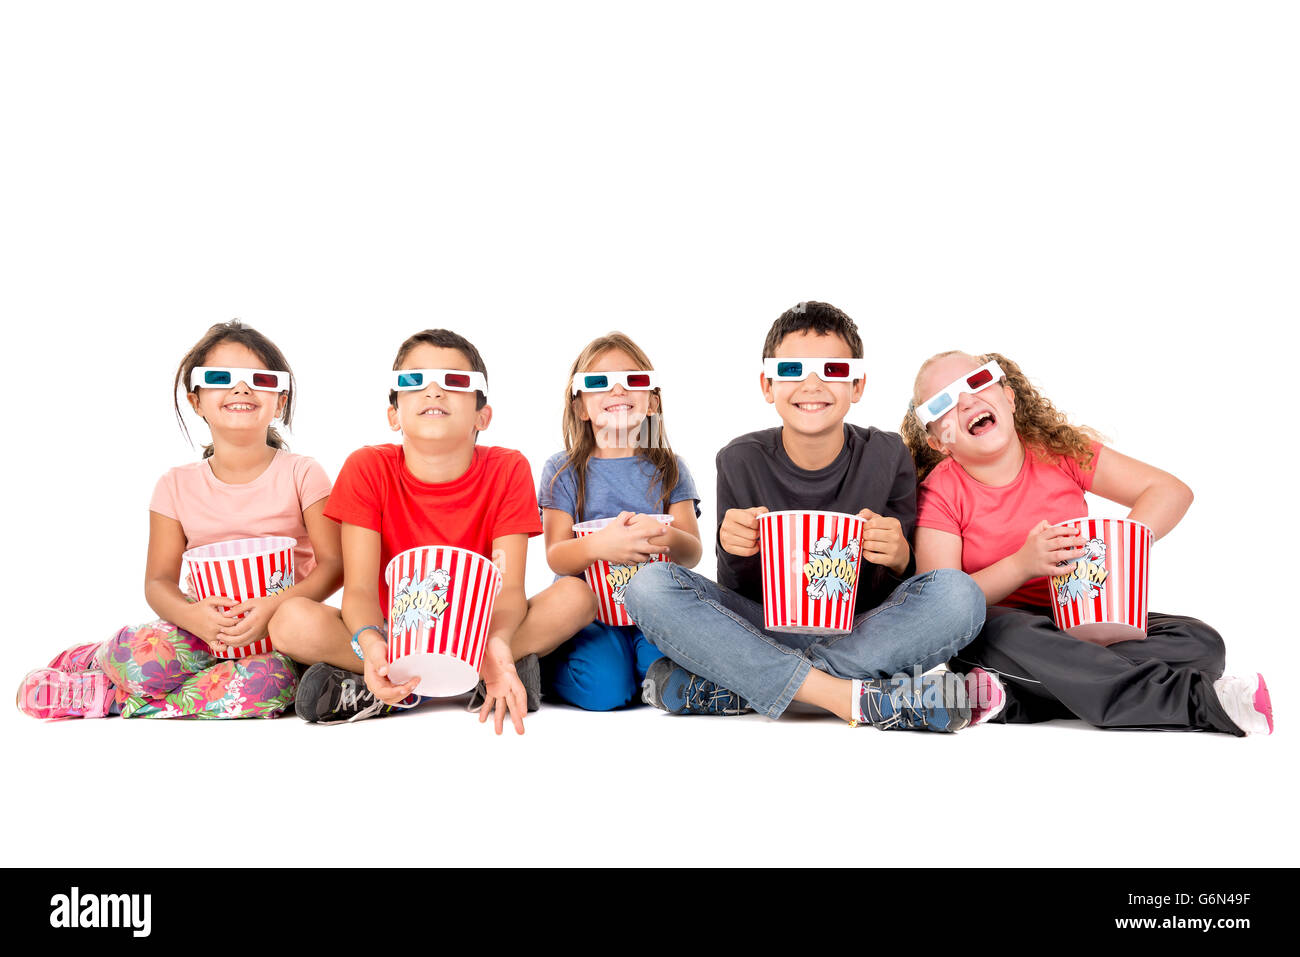 Group of children with 3d glasses and popcorn Stock Photo